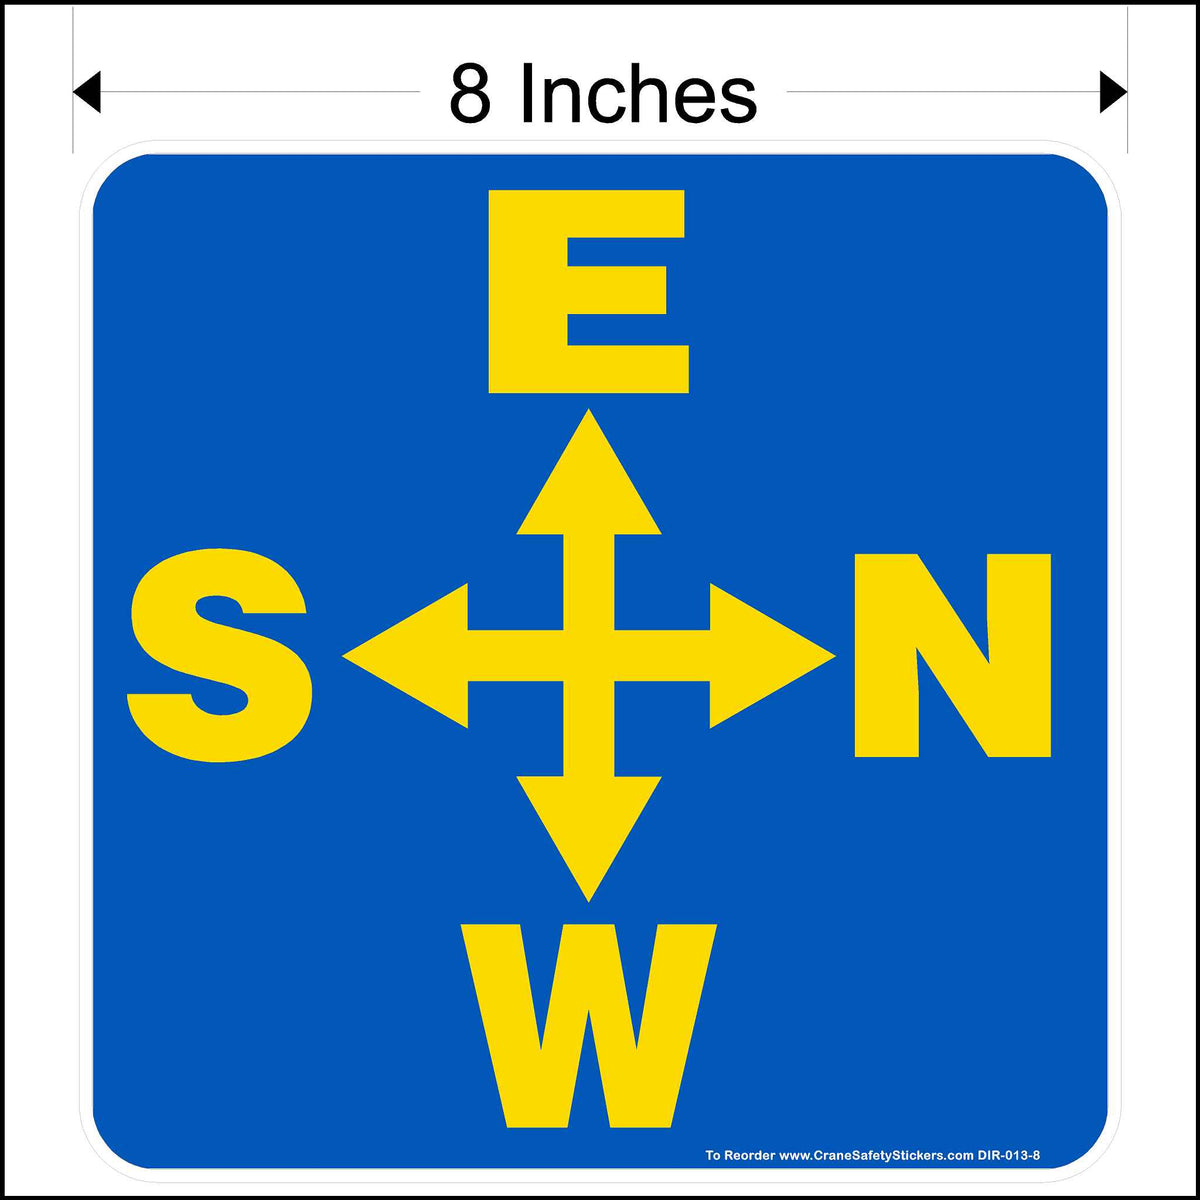 Overhead crane directional decal printed in blue and yellow measuring 8 inches square.